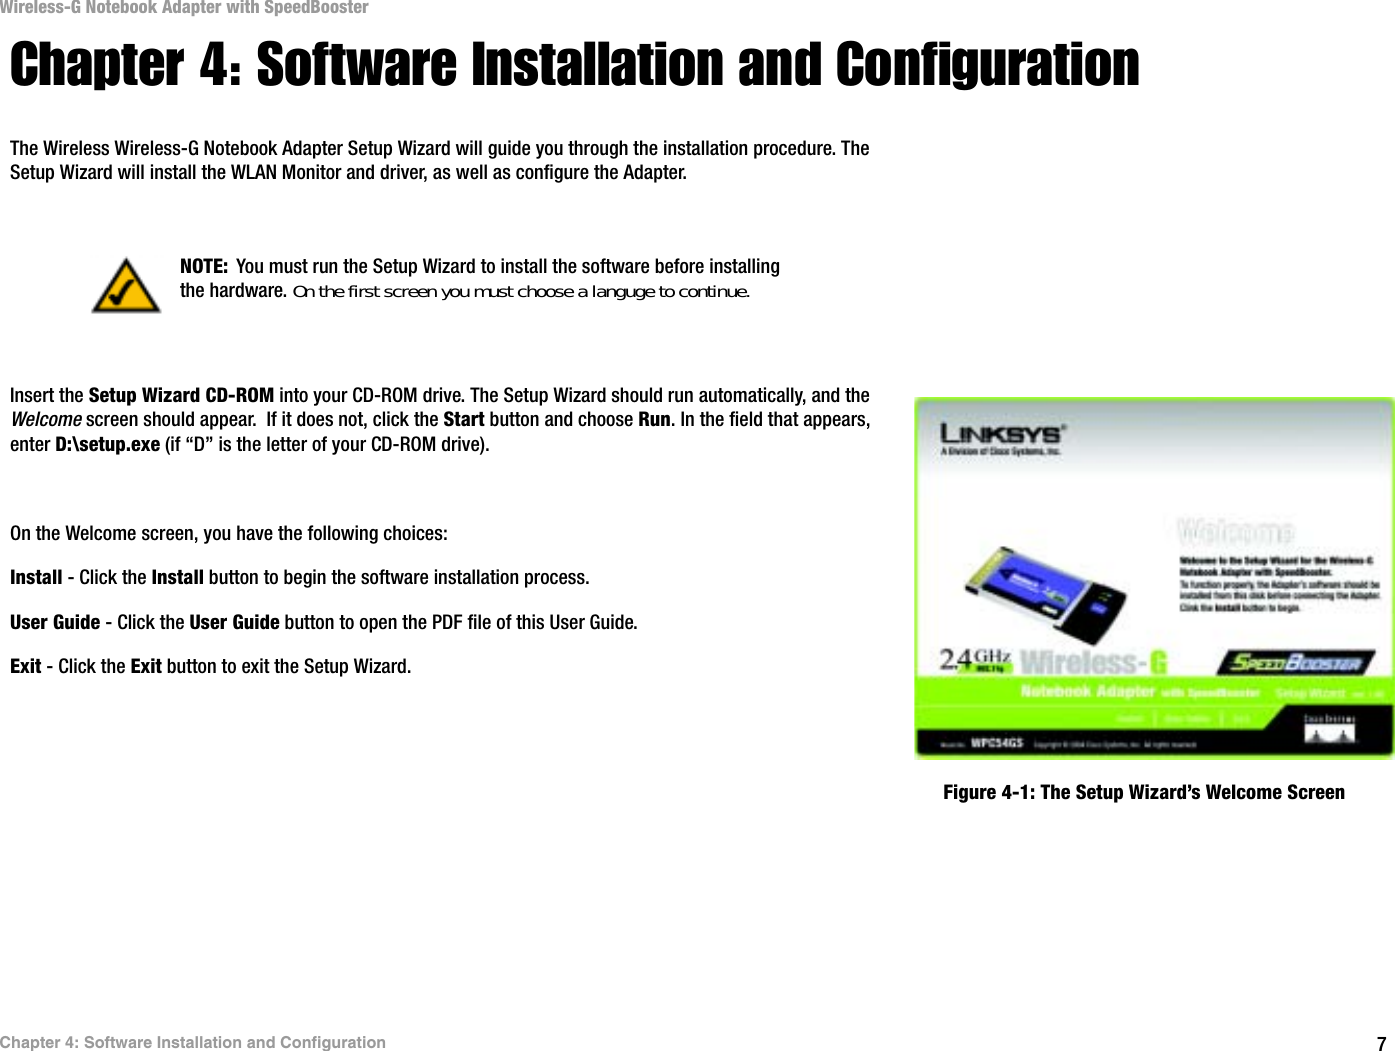 7Chapter 4: Software Installation and ConfigurationWireless-G Notebook Adapter with SpeedBoosterChapter 4: Software Installation and ConfigurationThe Wireless Wireless-G Notebook Adapter Setup Wizard will guide you through the installation procedure. The Setup Wizard will install the WLAN Monitor and driver, as well as configure the Adapter.Insert the Setup Wizard CD-ROM into your CD-ROM drive. The Setup Wizard should run automatically, and the Welcome screen should appear.  If it does not, click the Start button and choose Run. In the field that appears, enter D:\setup.exe (if “D” is the letter of your CD-ROM drive). On the Welcome screen, you have the following choices:Install - Click the Install button to begin the software installation process. User Guide - Click the User Guide button to open the PDF file of this User Guide. Exit - Click the Exit button to exit the Setup Wizard.NOTE: You must run the Setup Wizard to install the software before installing the hardware. On the first screen you must choose a languge to continue.Figure 4-1: The Setup Wizard’s Welcome Screen